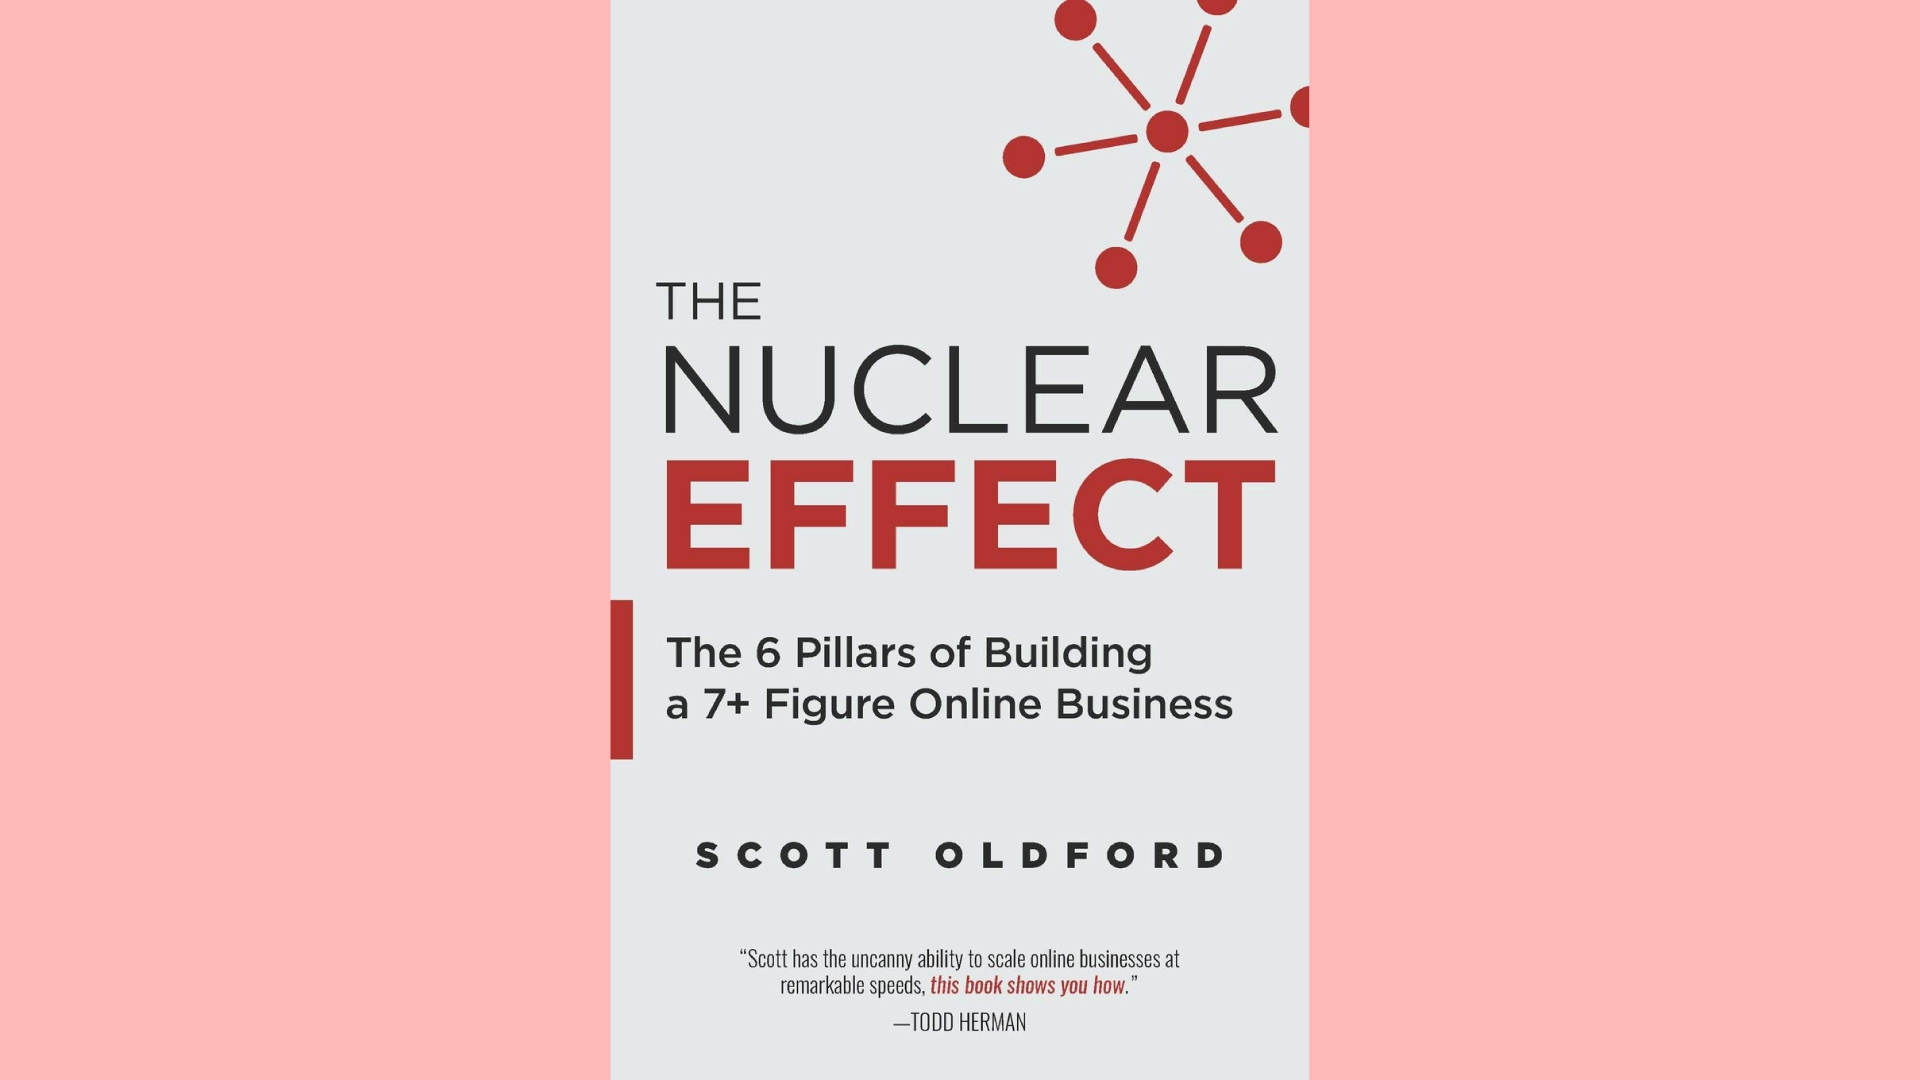 Summary: The Nuclear Effect  by Scott Oldford